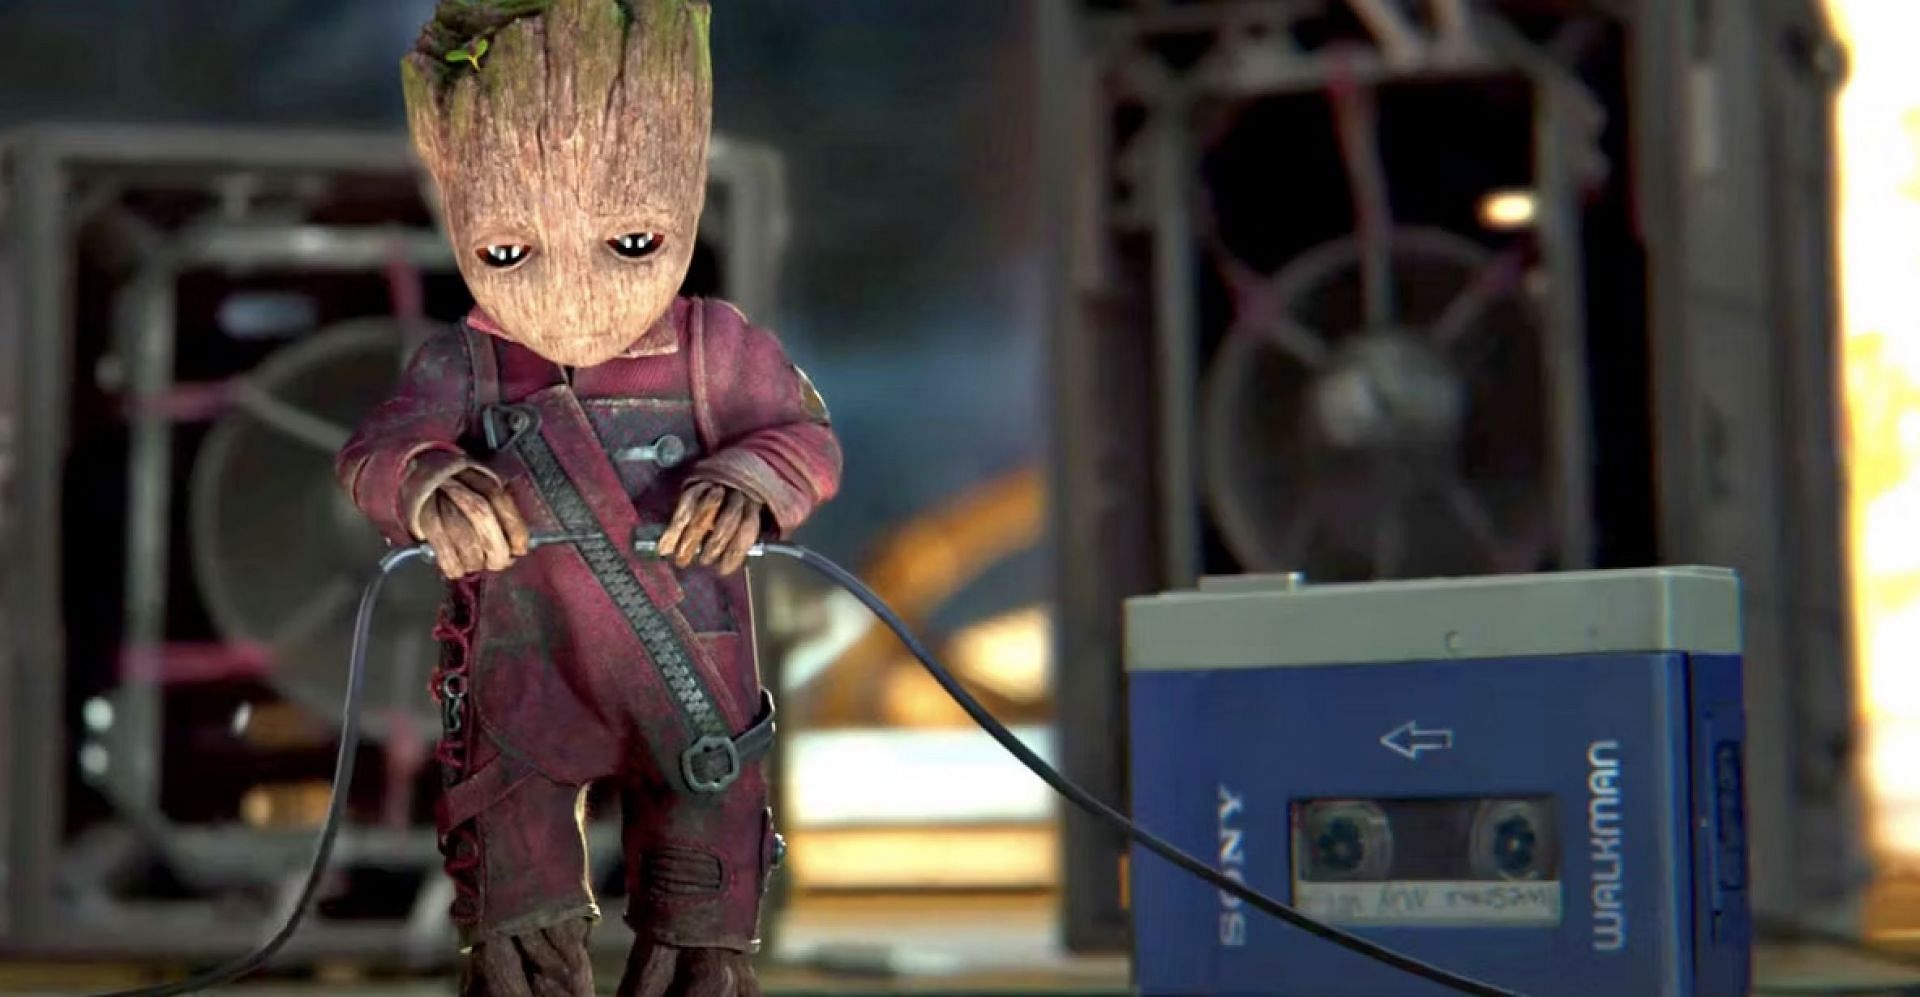 Groot grooves to the classic hits (Image via Marvel Studios)